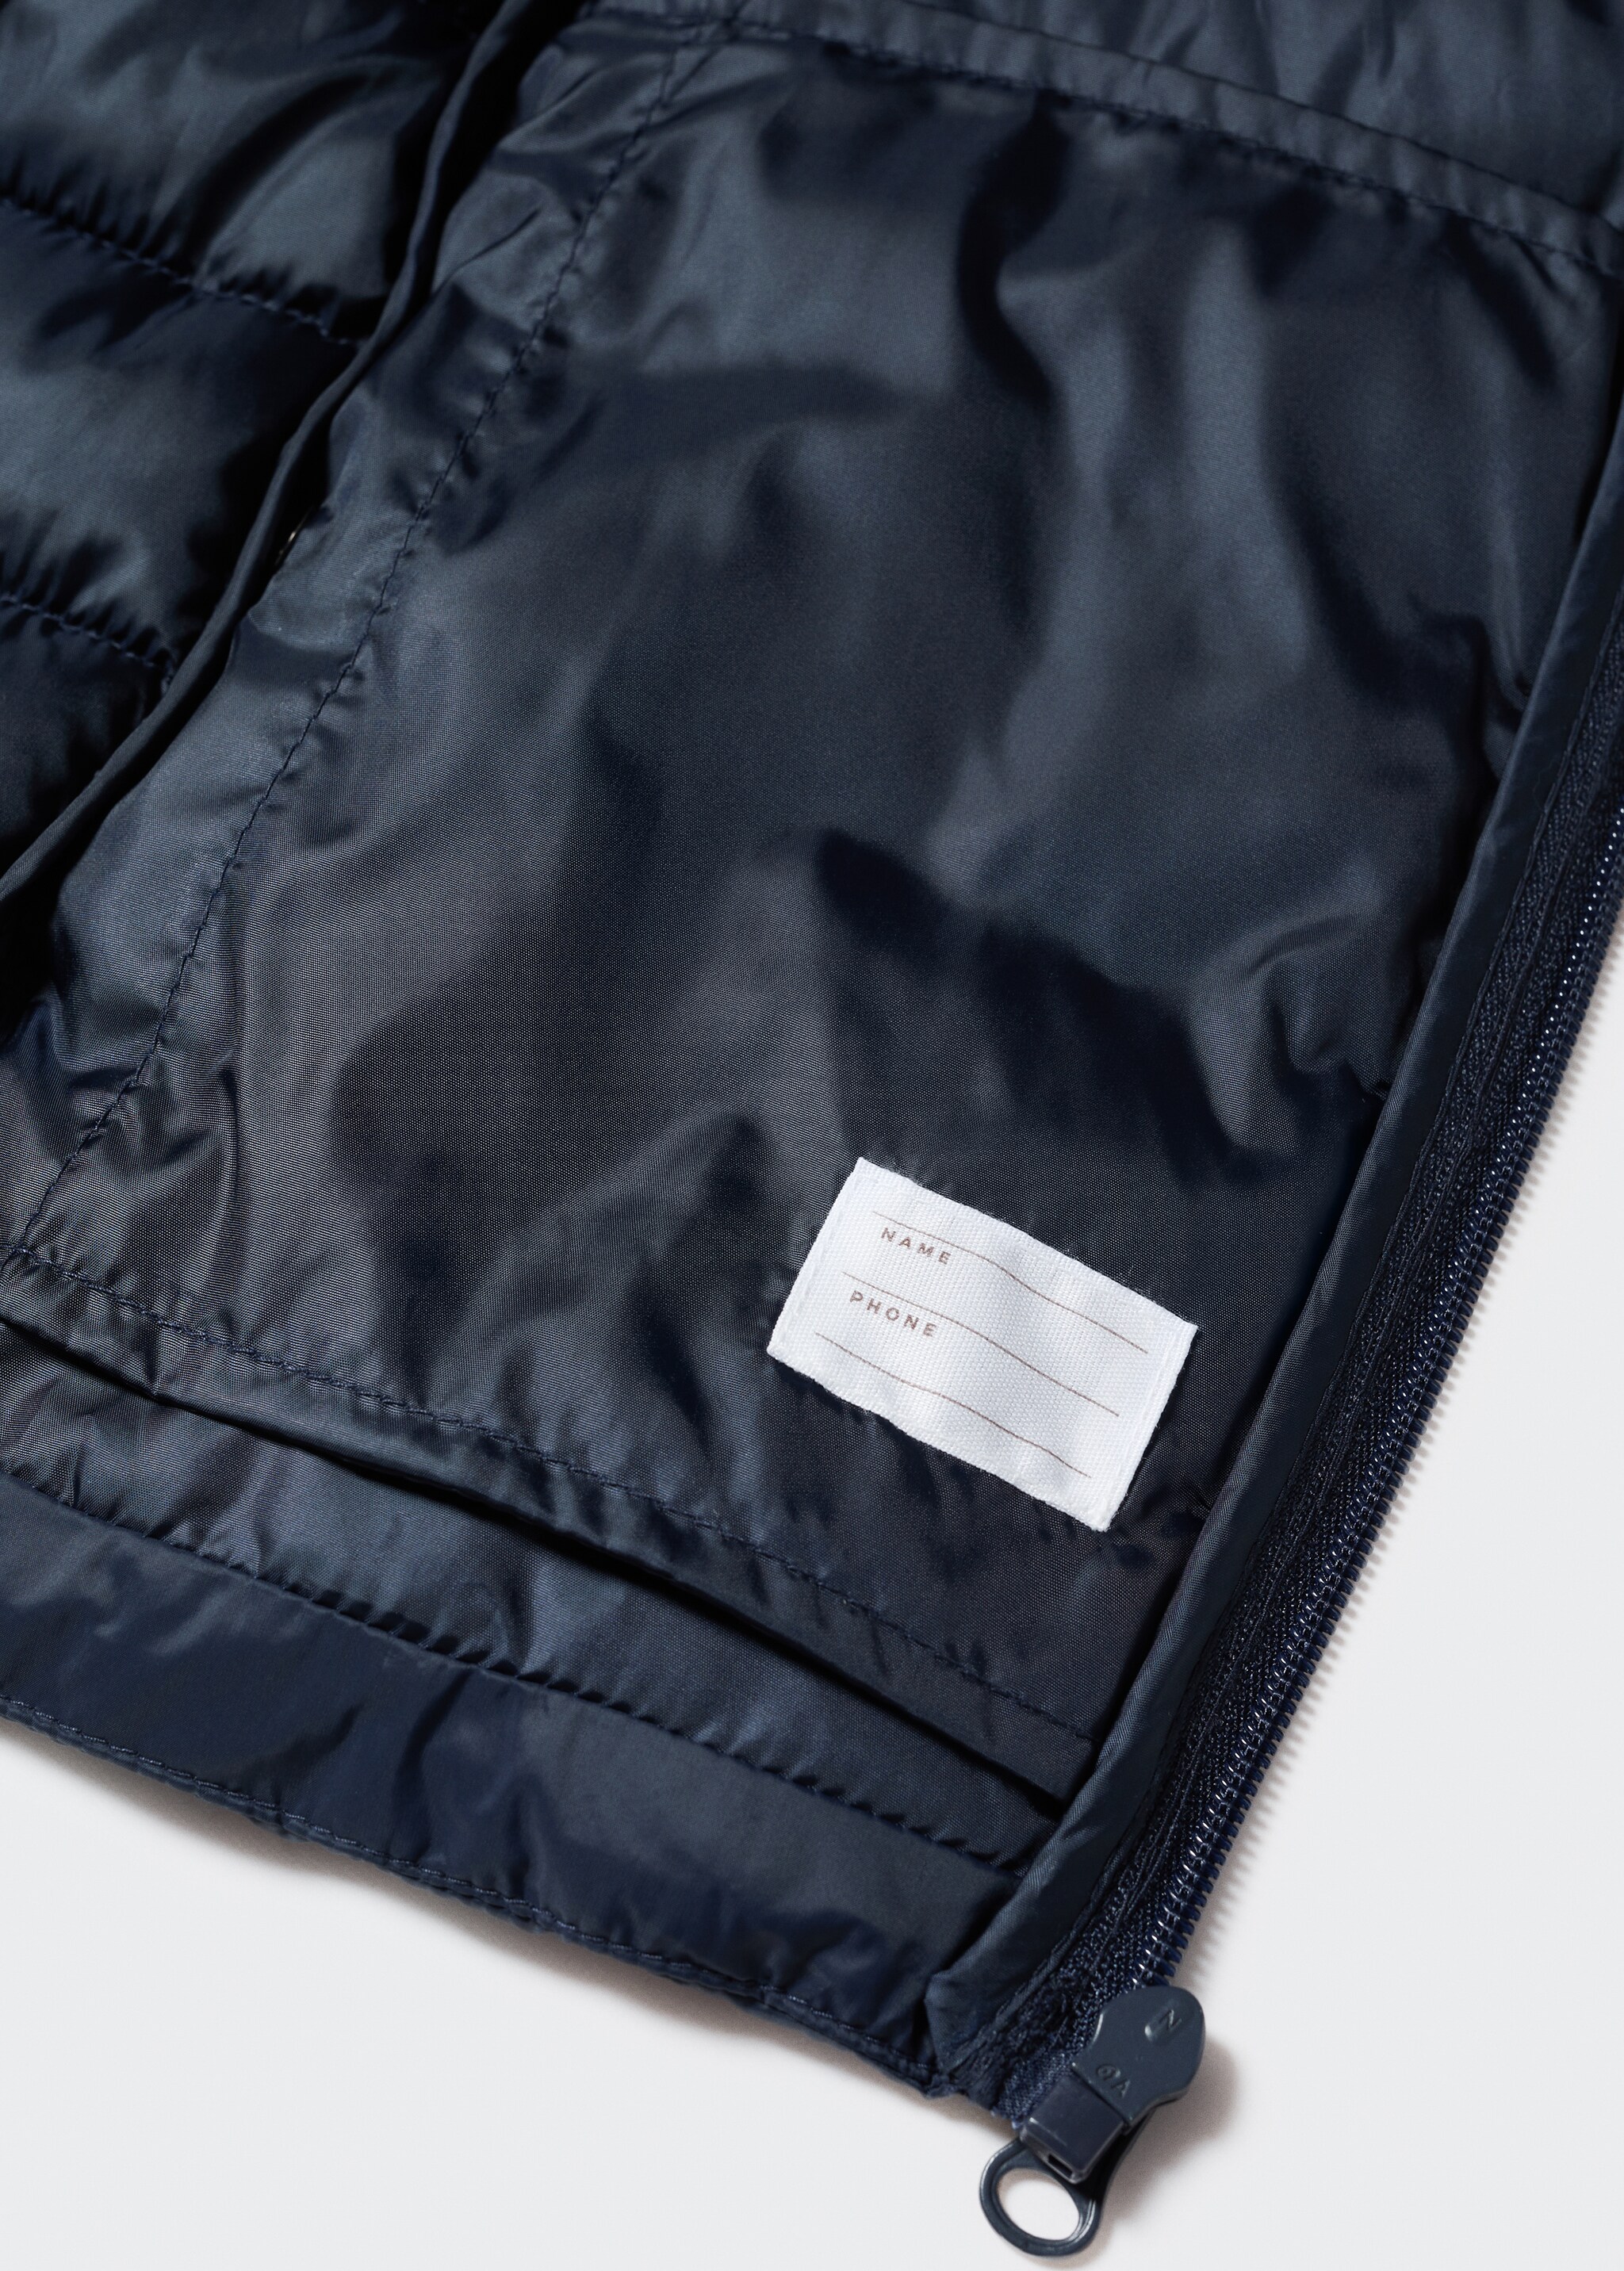 Quilted gilet - Details of the article 8